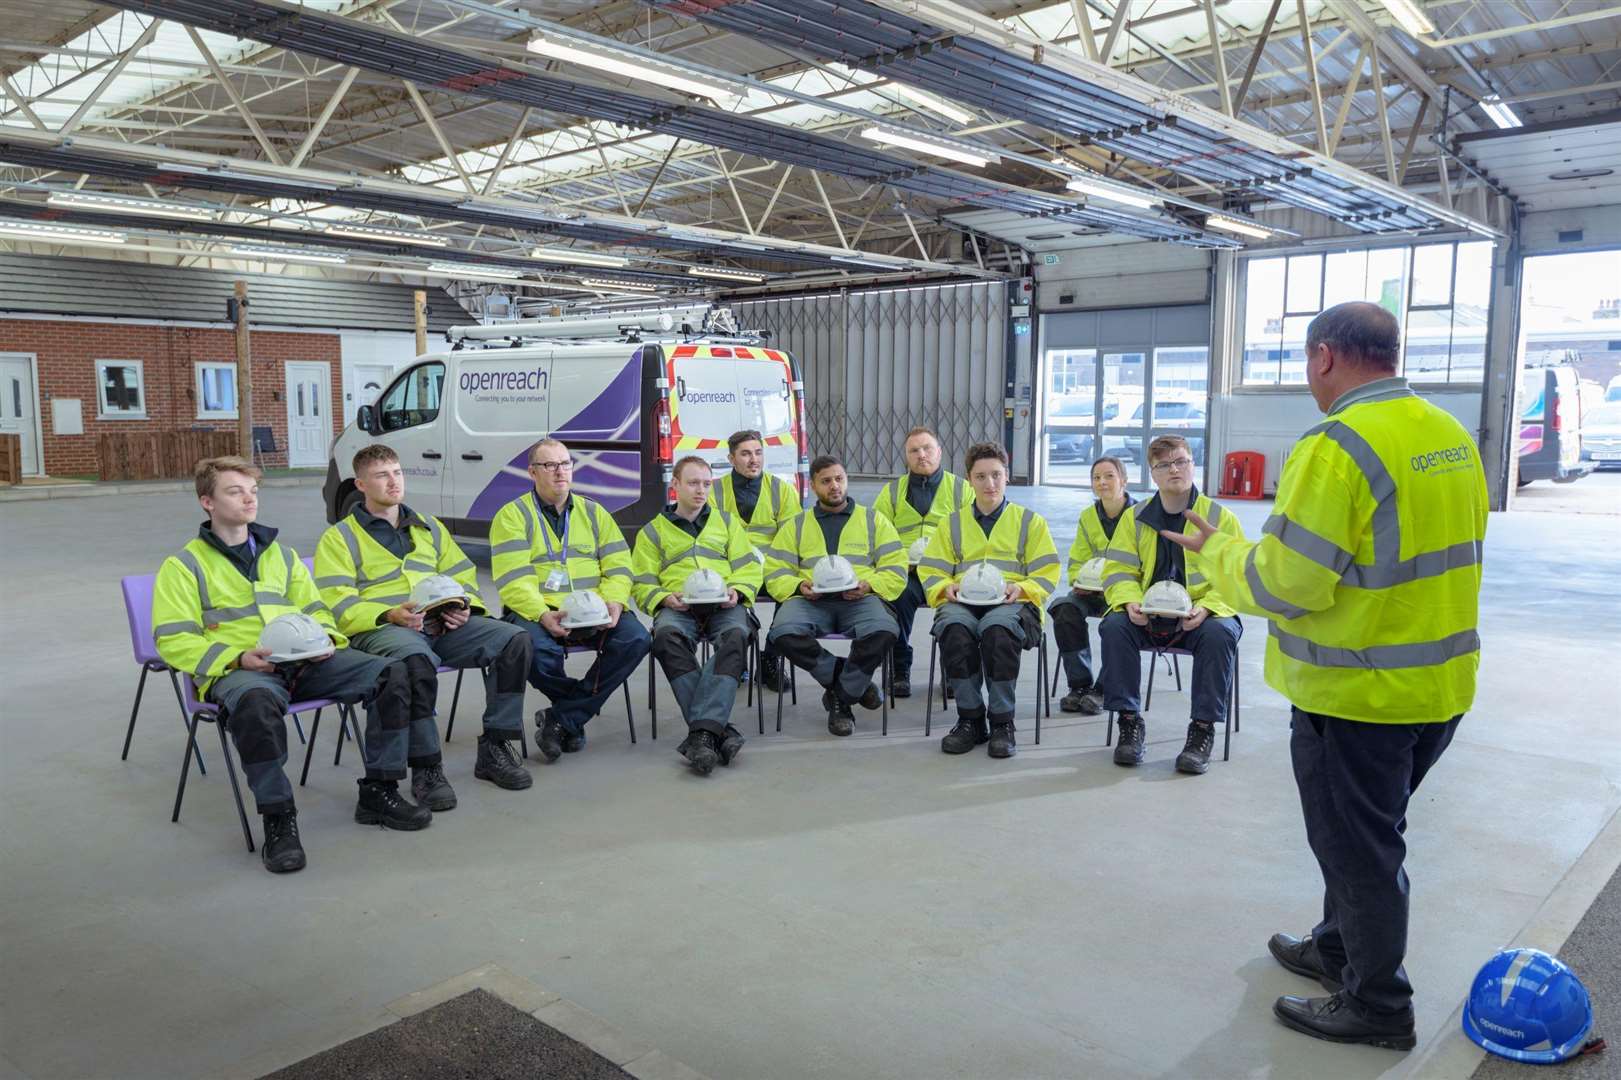 Trainees learn the ropes at Openreach training centre (6798785)